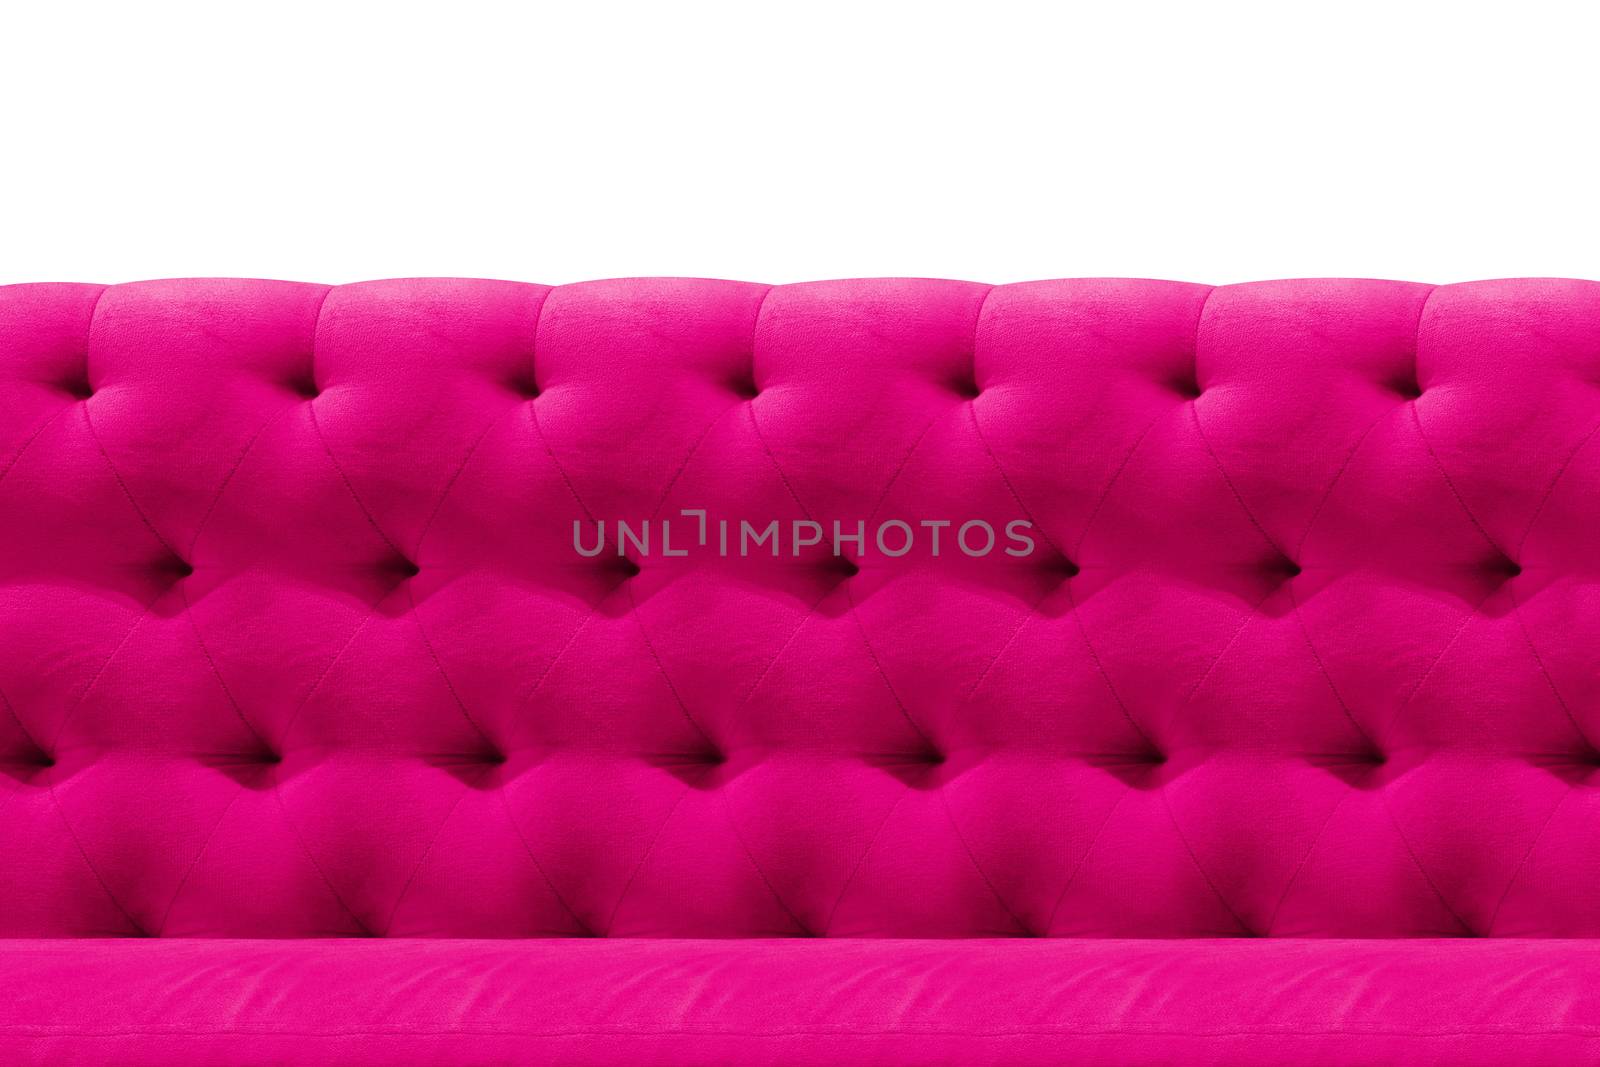 Luxury Pink sofa velvet cushion close-up pattern background on white by cgdeaw